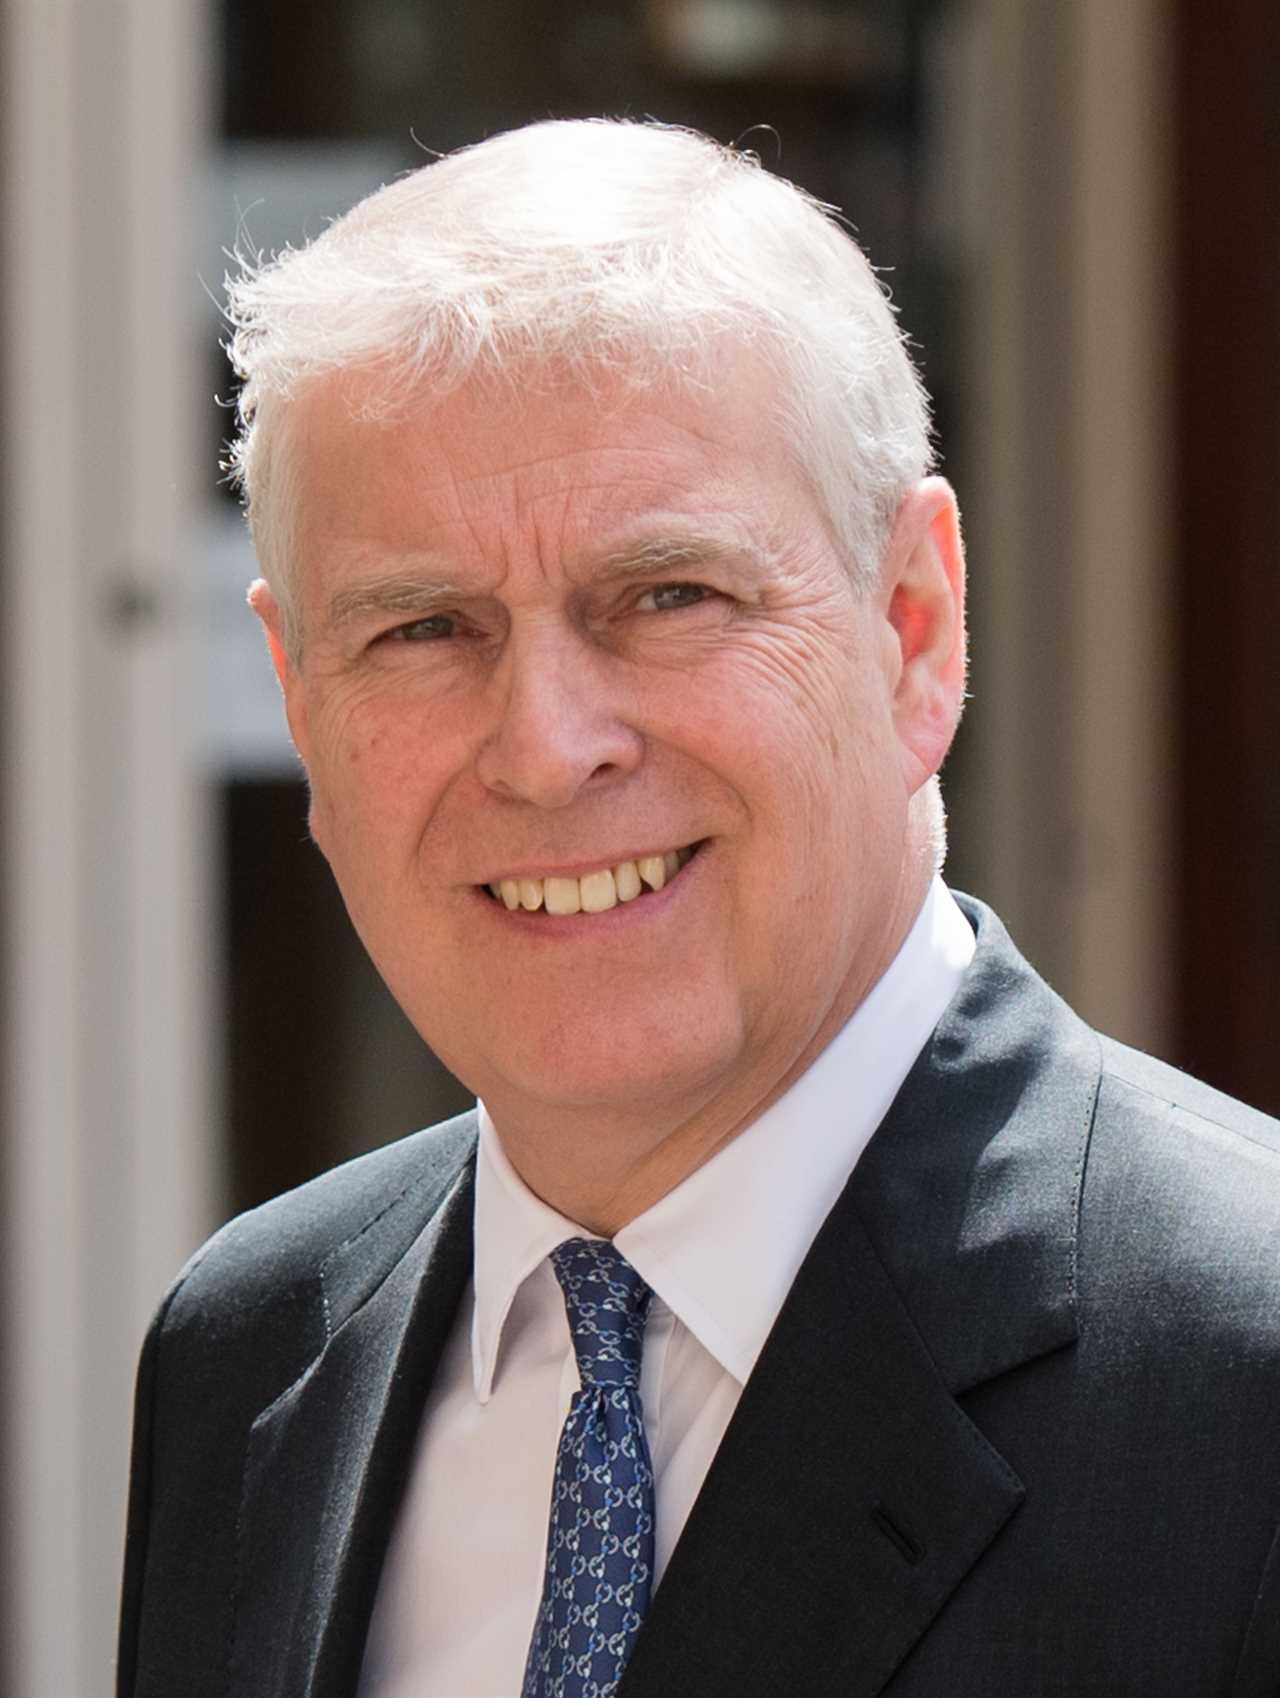 Inside St James’ Palace – the mansion that could be Prince Andrew’s new home as he’s booted out of Buckingham